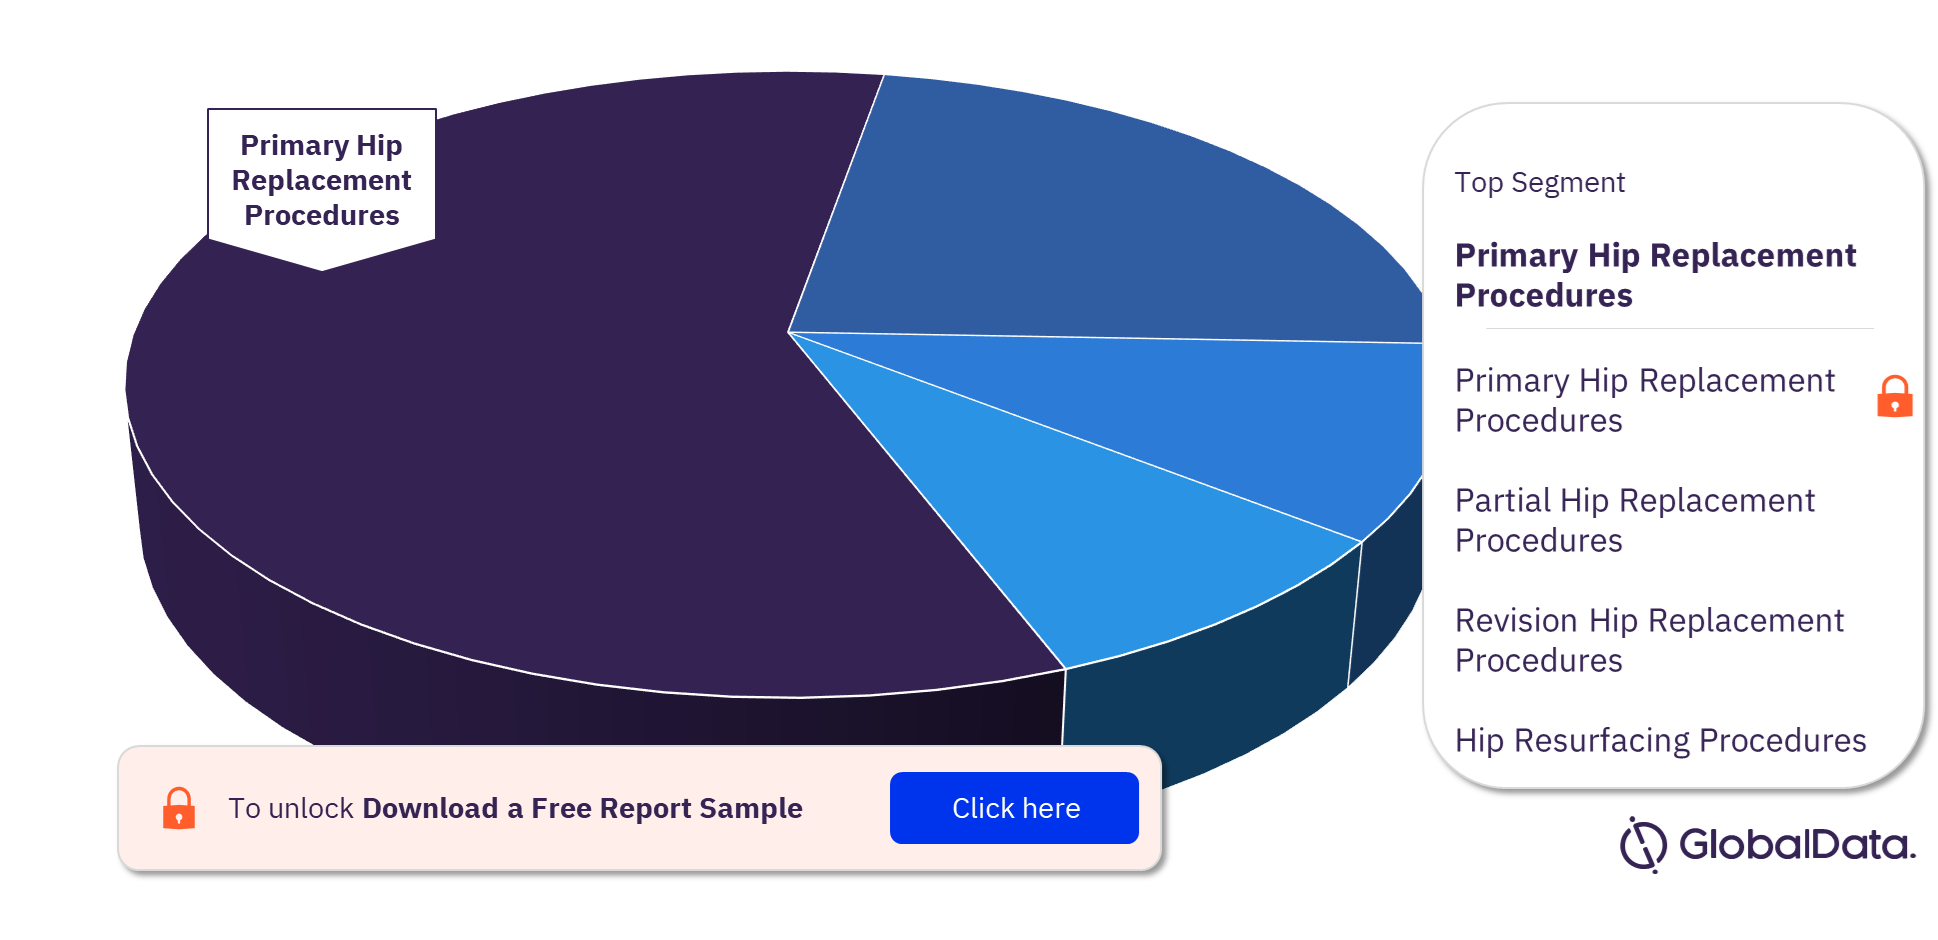 North America Hip Replacement Procedures Market Analysis by Segments, 2022 (%)